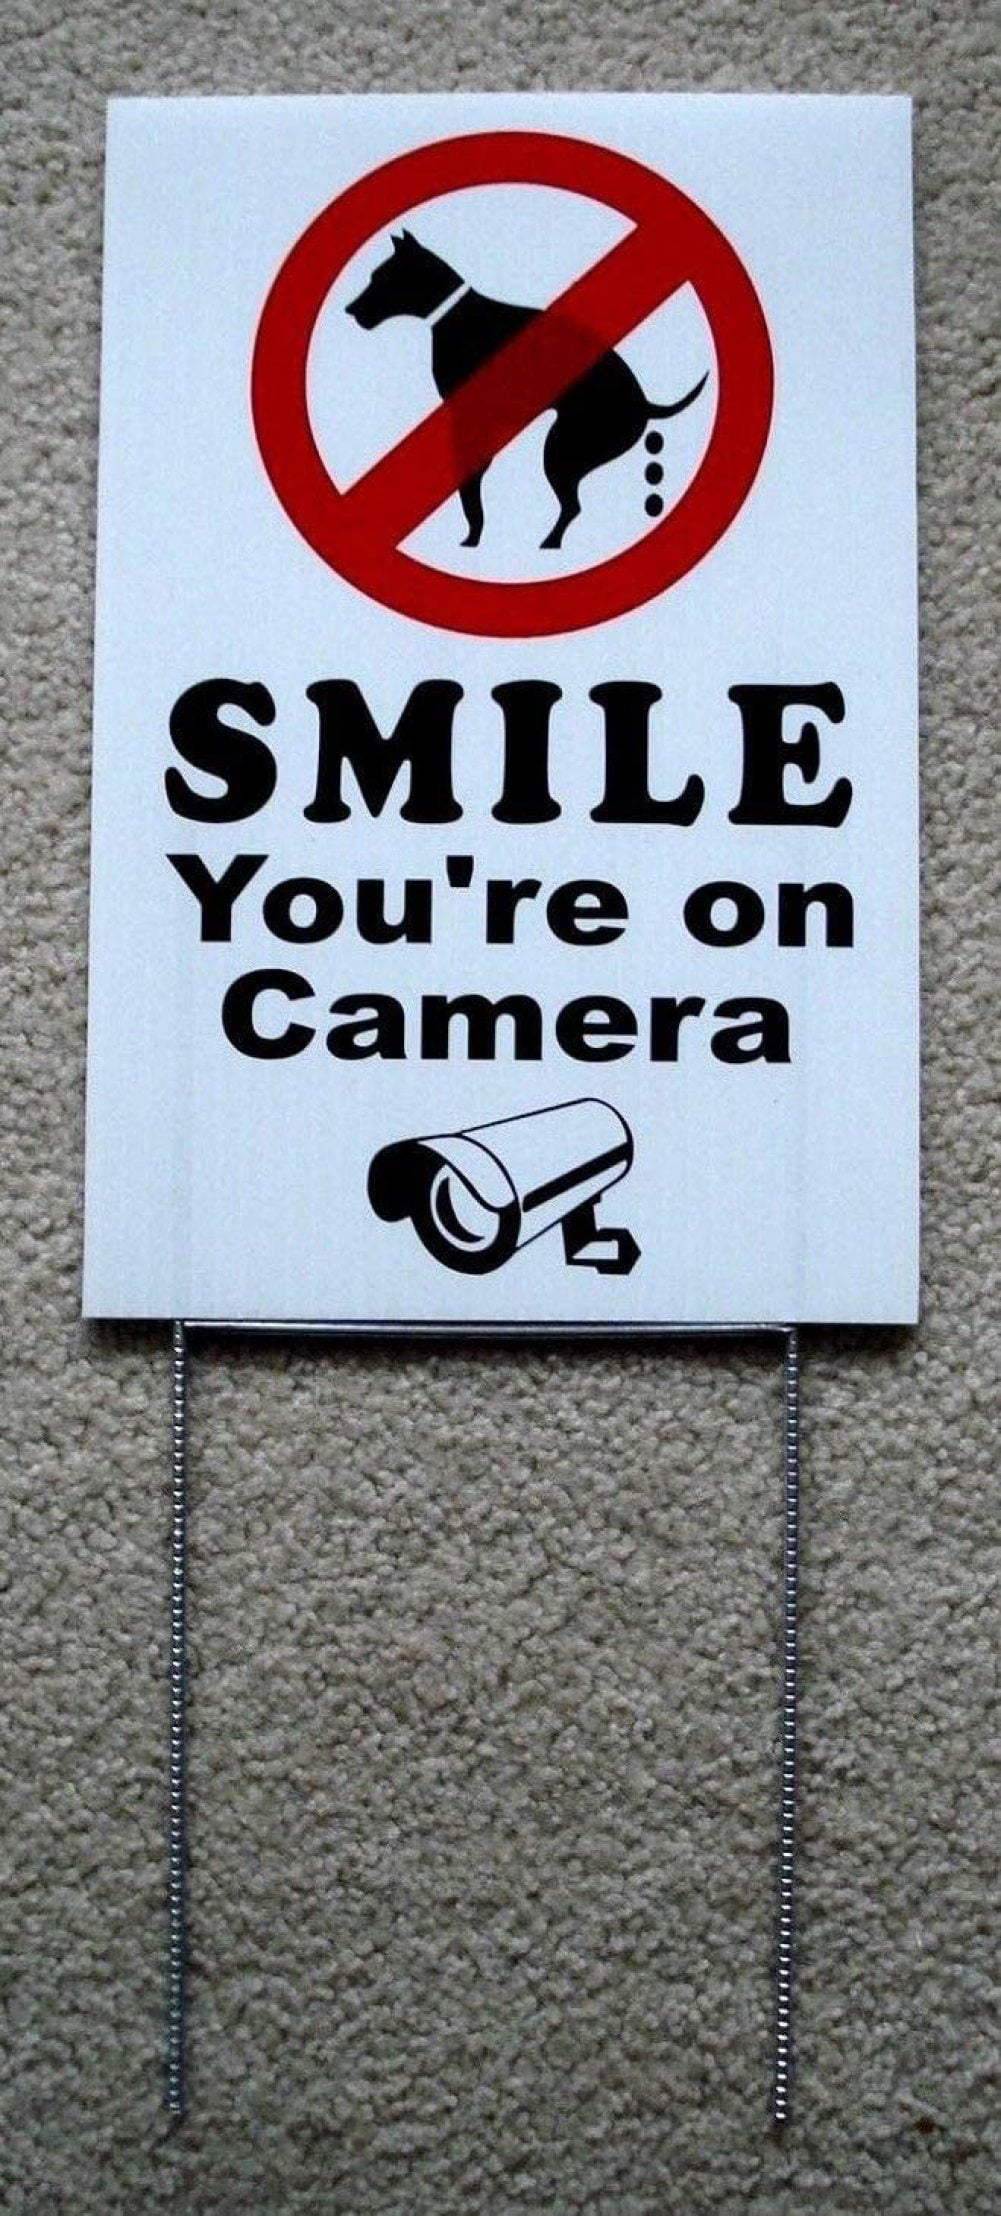 SMILE YOU'RE ON CAMERA Coroplast YARD SIGN 8x12 w/Stake 25% OFF 3 OR MORE! 